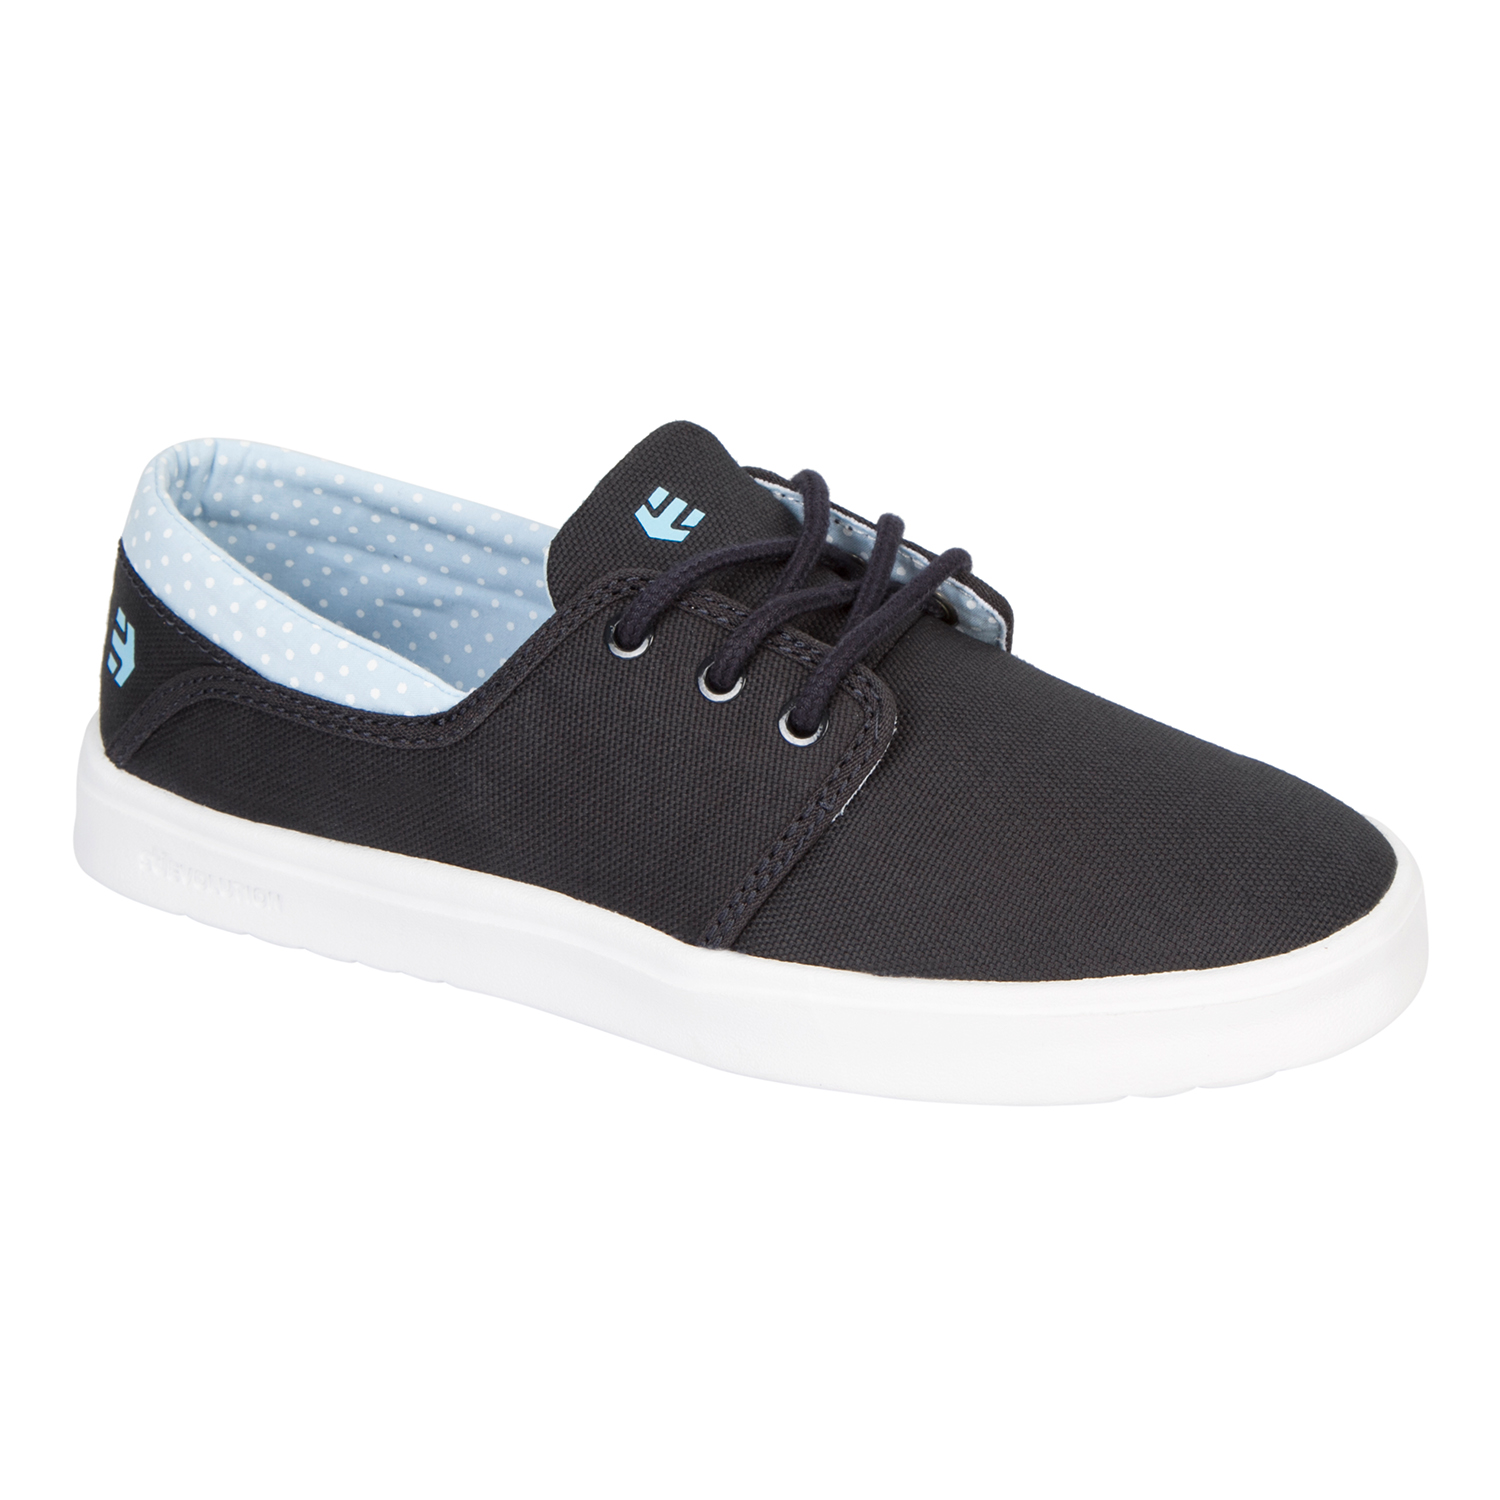 Etnies Girls Shoes Corby SC Navy/Blue